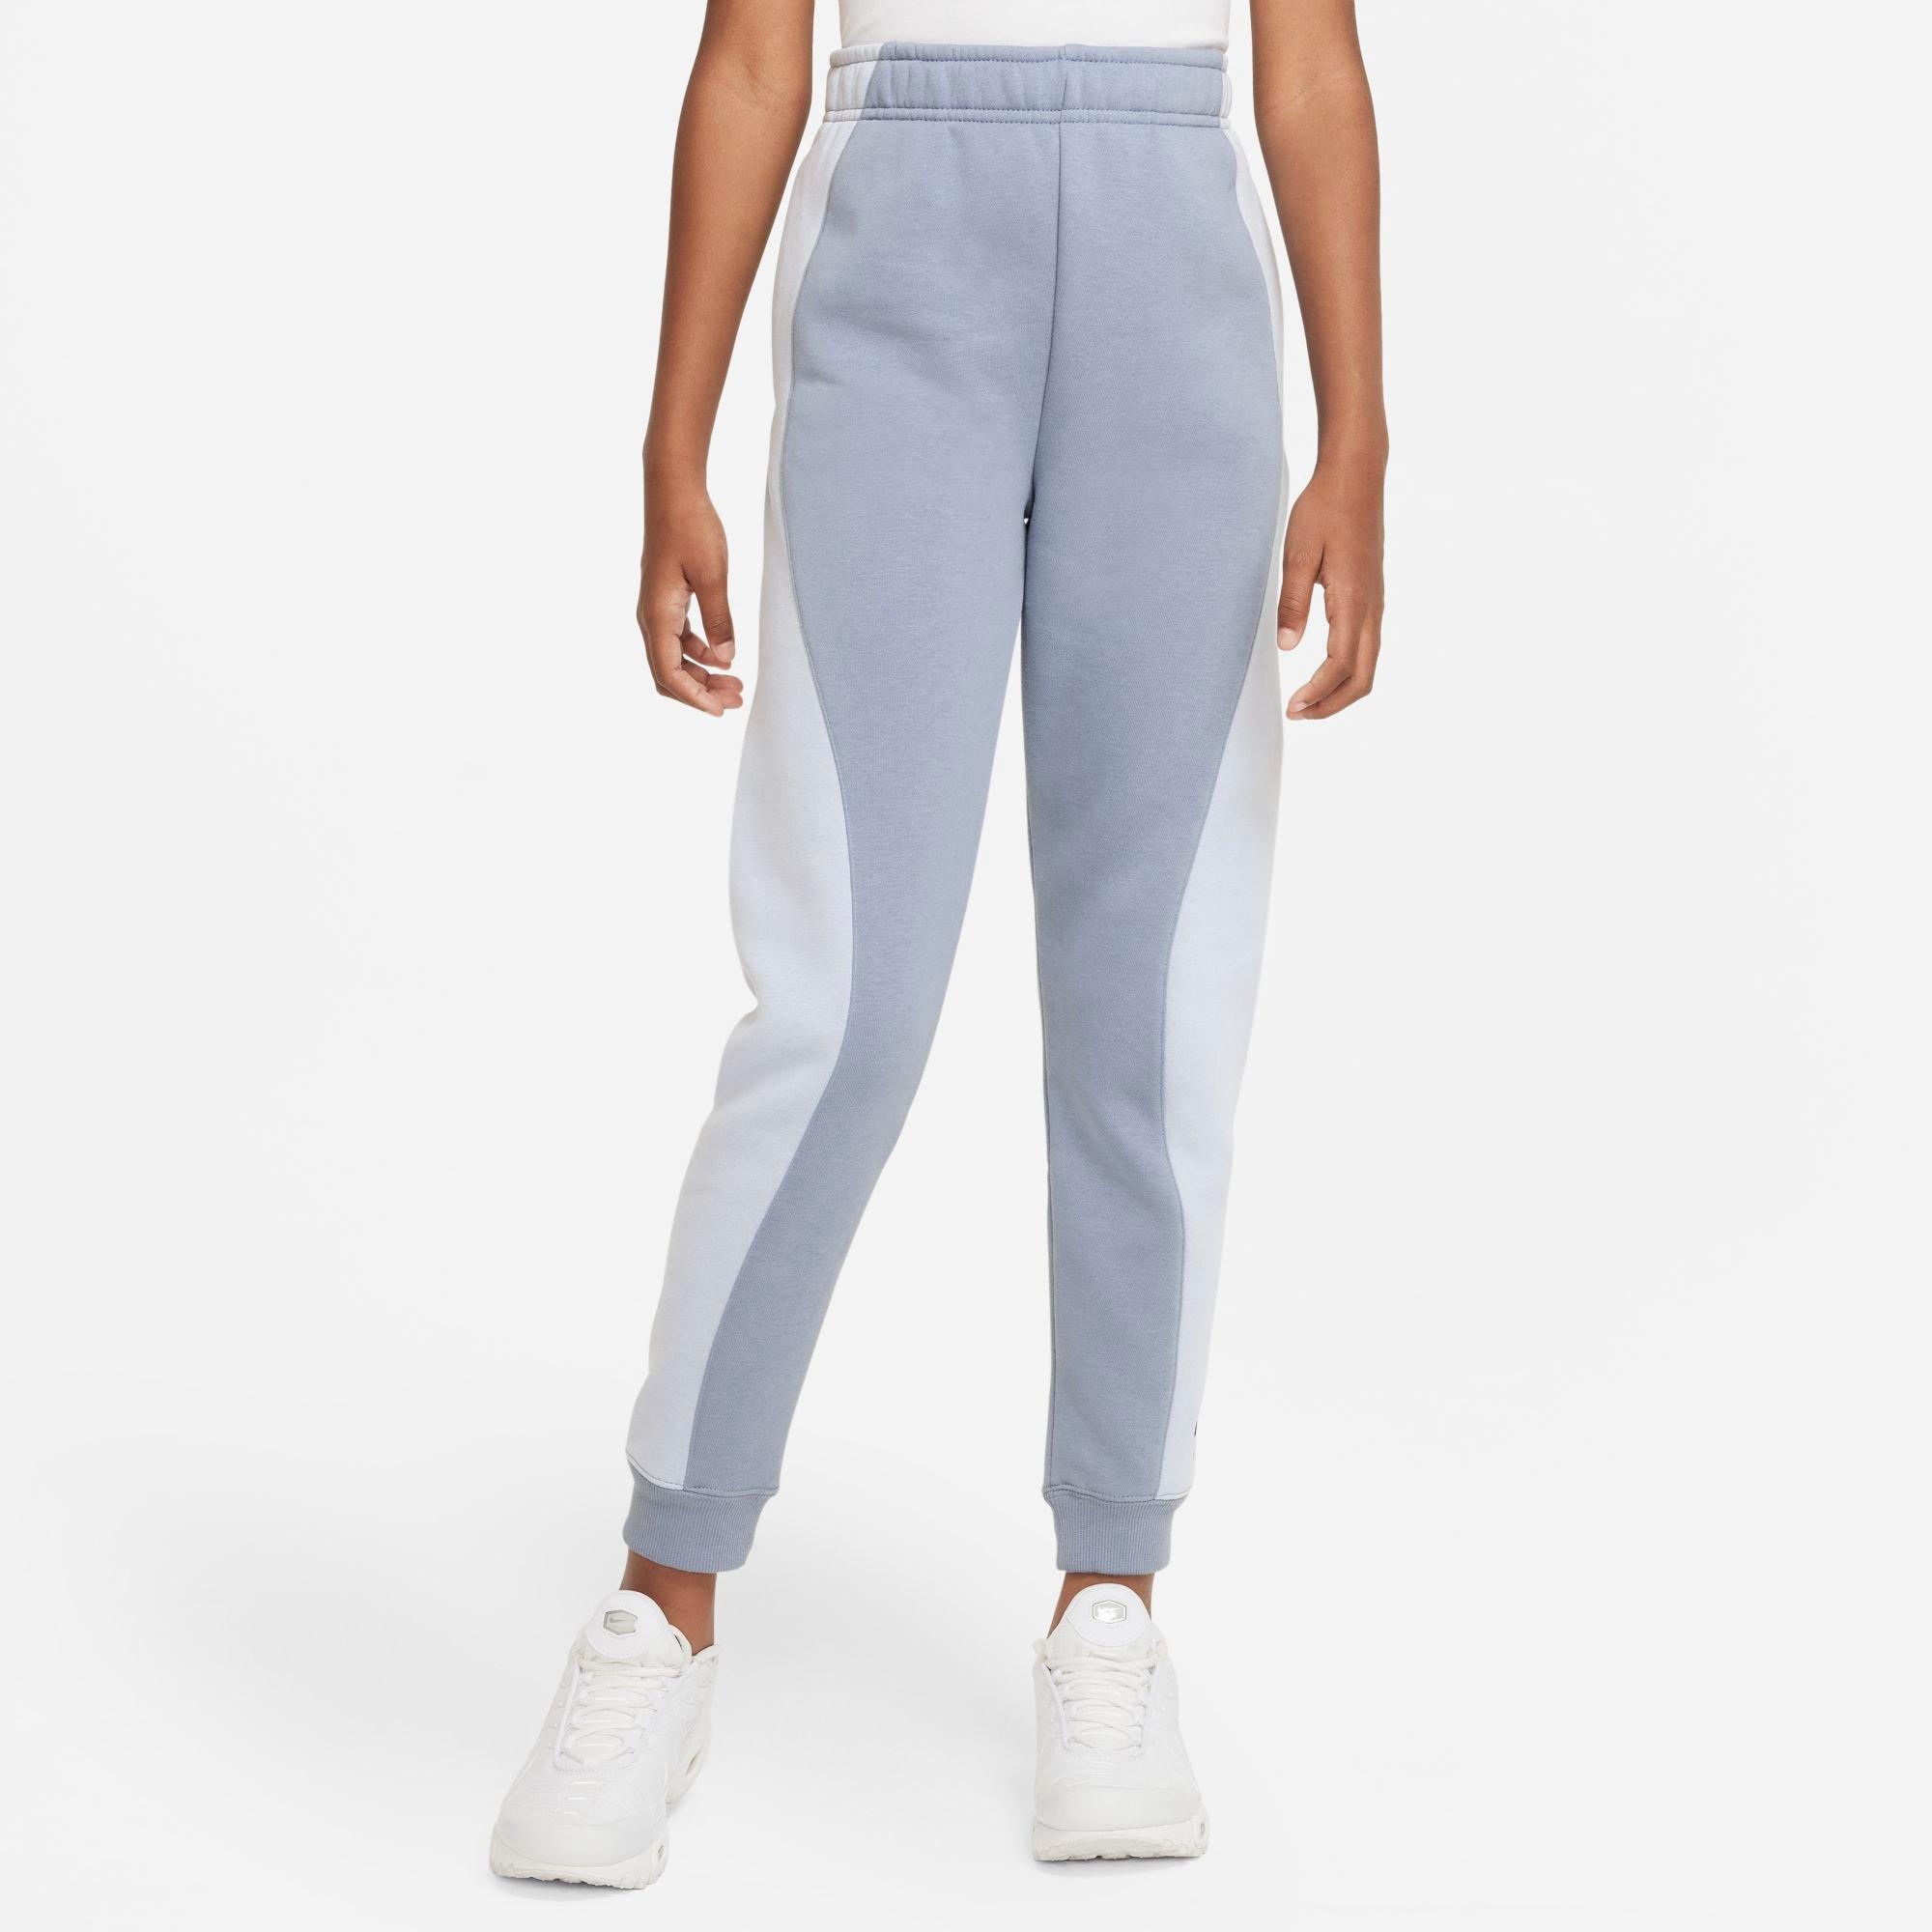 NIKE NIKE GIRLS' AIR FRENCH TERRY JOGGER PANTS